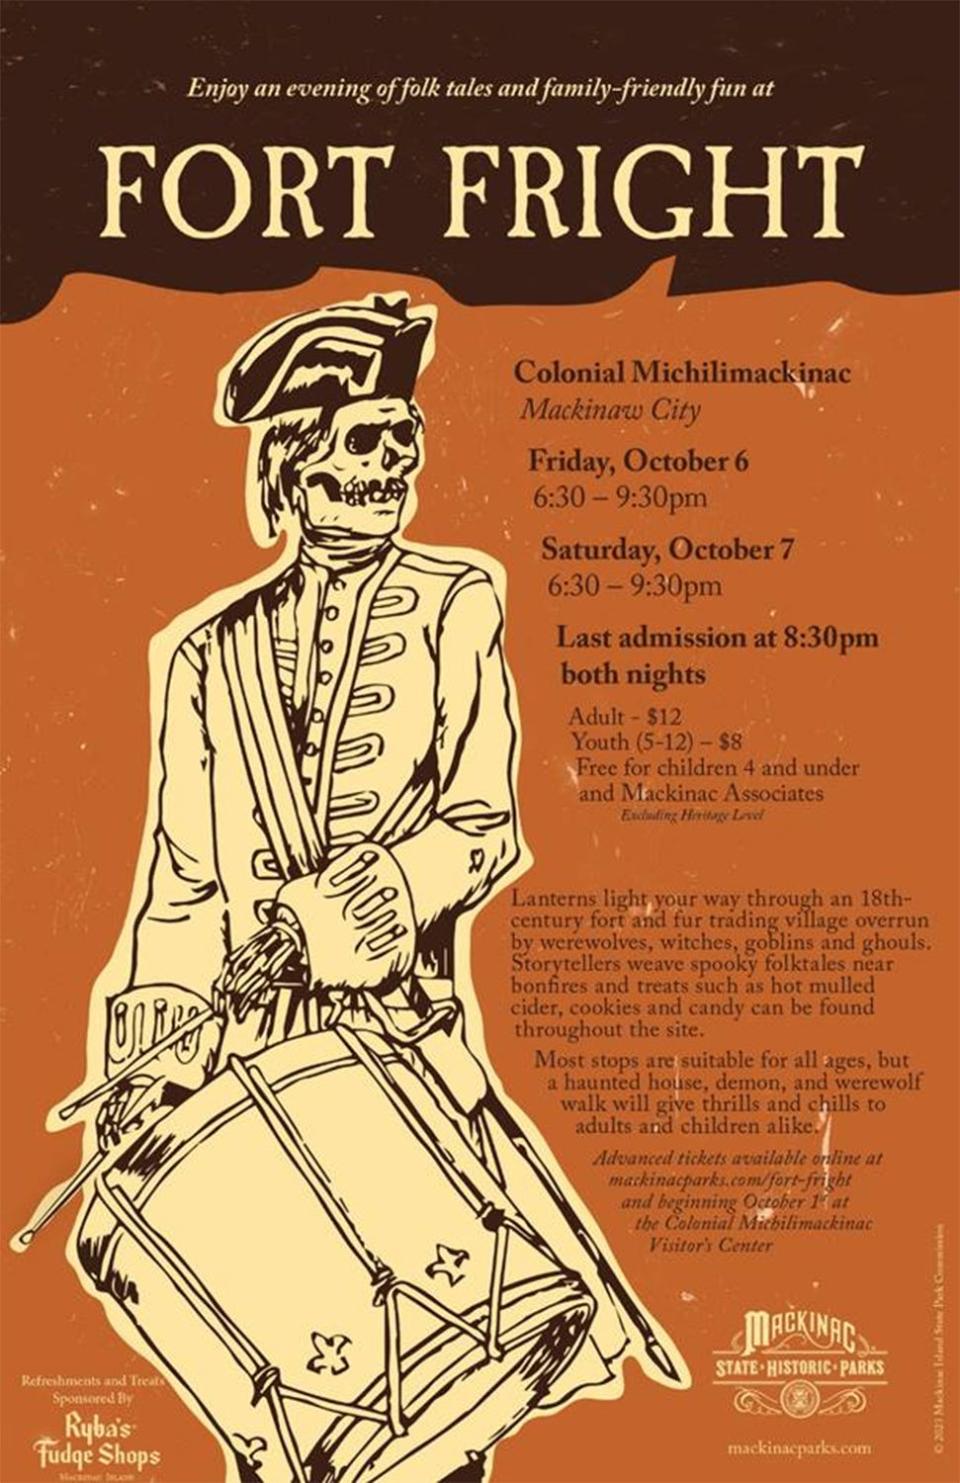 Fort Fright returns to Colonial Michilimackinac Oct. 6-7, 2023.